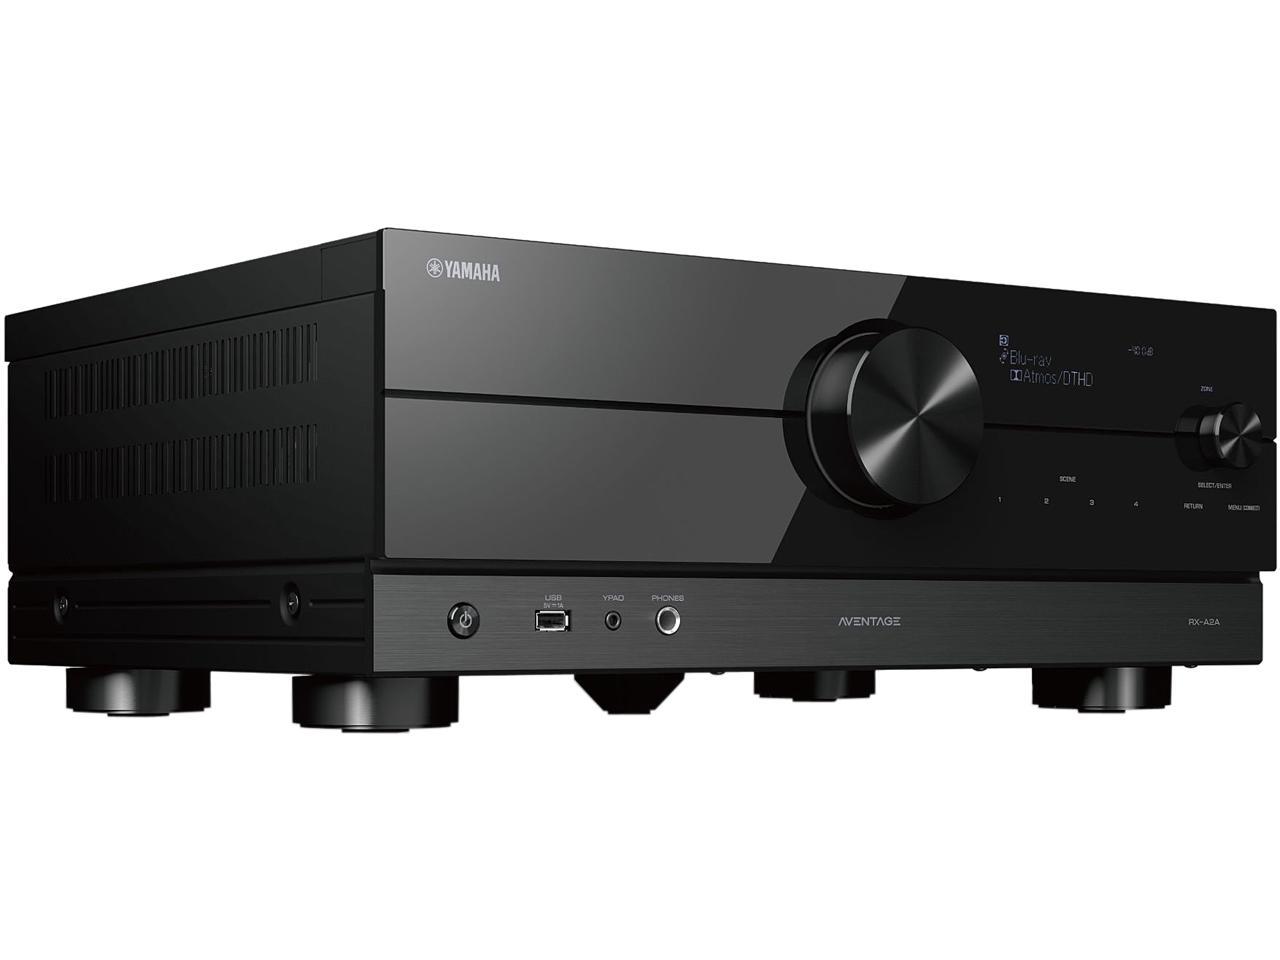 Yamaha AVENTAGE RX-A2A 7.2-Channel AV Receiver + $410 Newegg Promo GC $1000 + free s/h